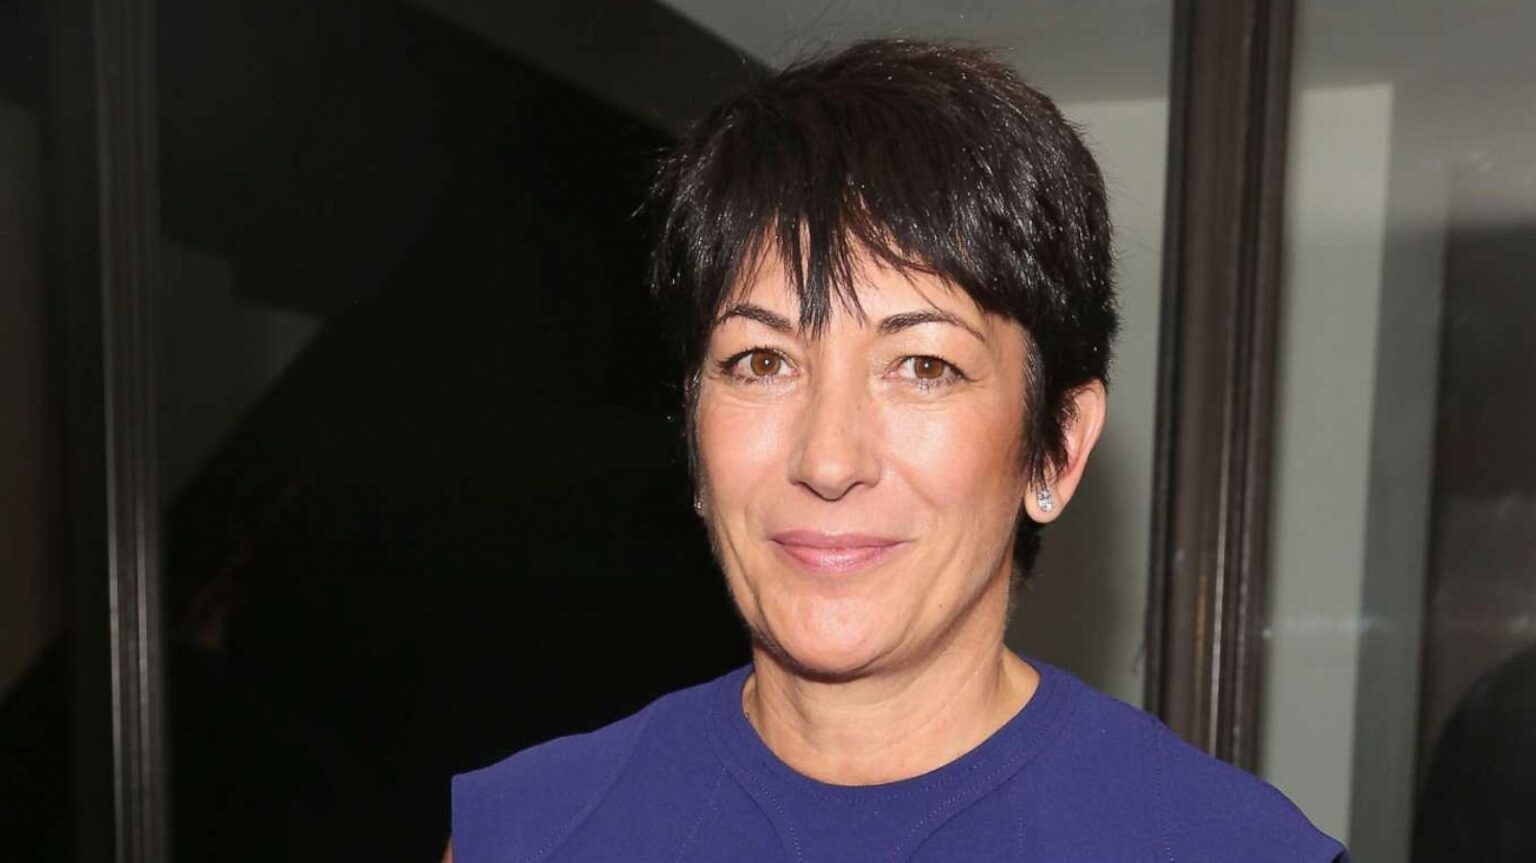 Ghislaine Maxwell’s secret hubby was revealed to be Scott Borgerson. Here's what he's said about Maxwell and the ongoing case.